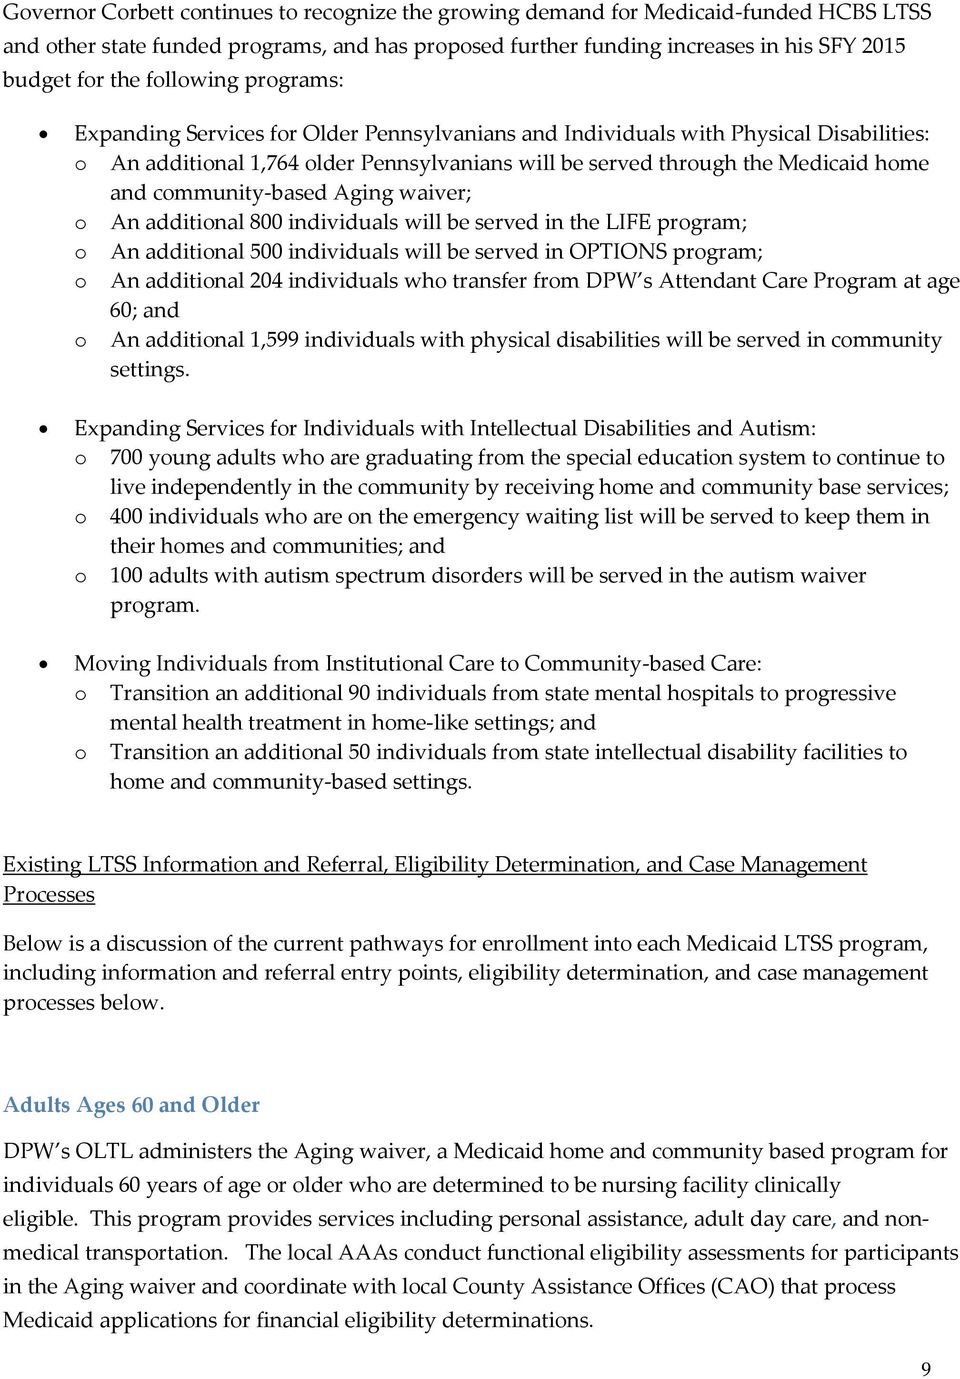 community-based Aging waiver; o An additional 800 individuals will be served in the LIFE program; o An additional 500 individuals will be served in OPTIONS program; o An additional 204 individuals